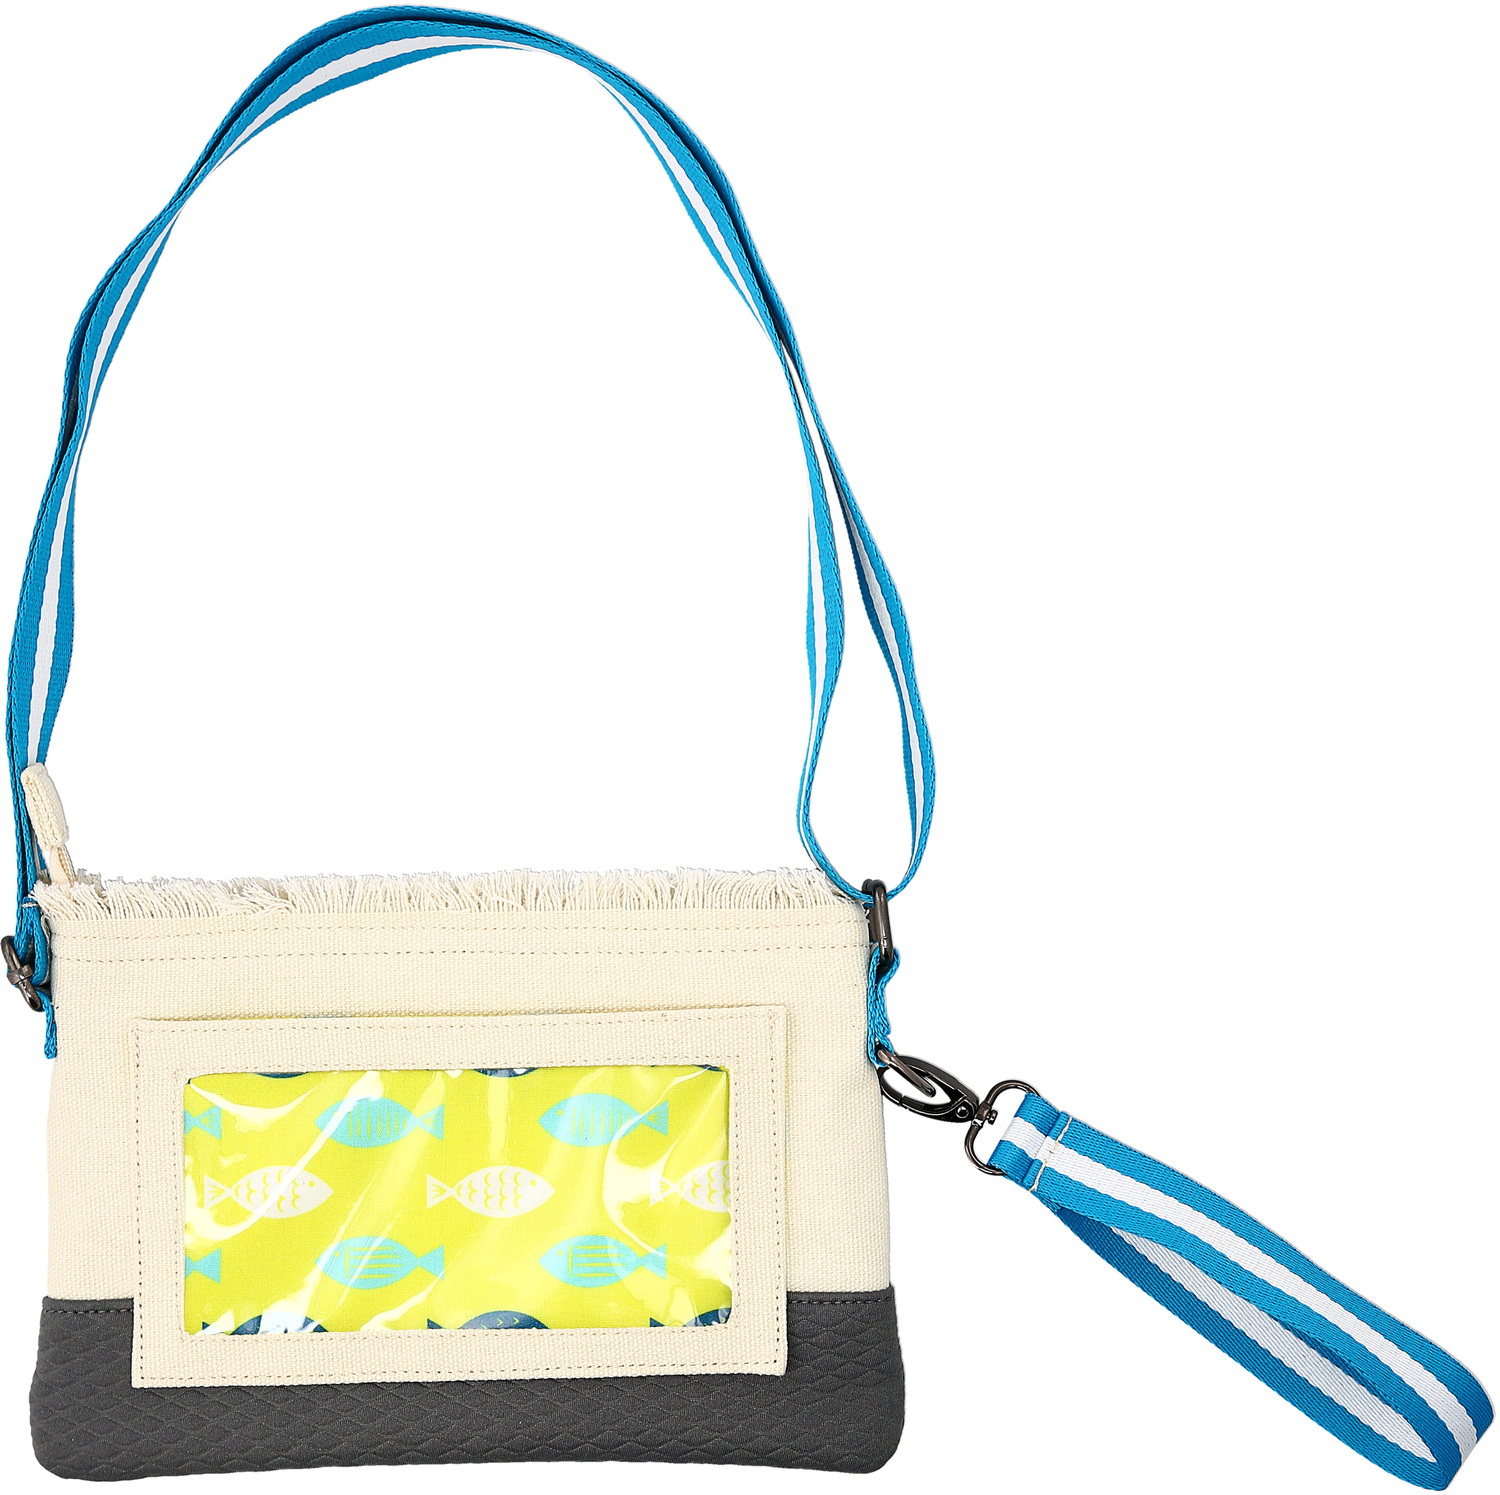 River by We People - River - 9.5" x 6.5" Touch Screen Crossbody Bag